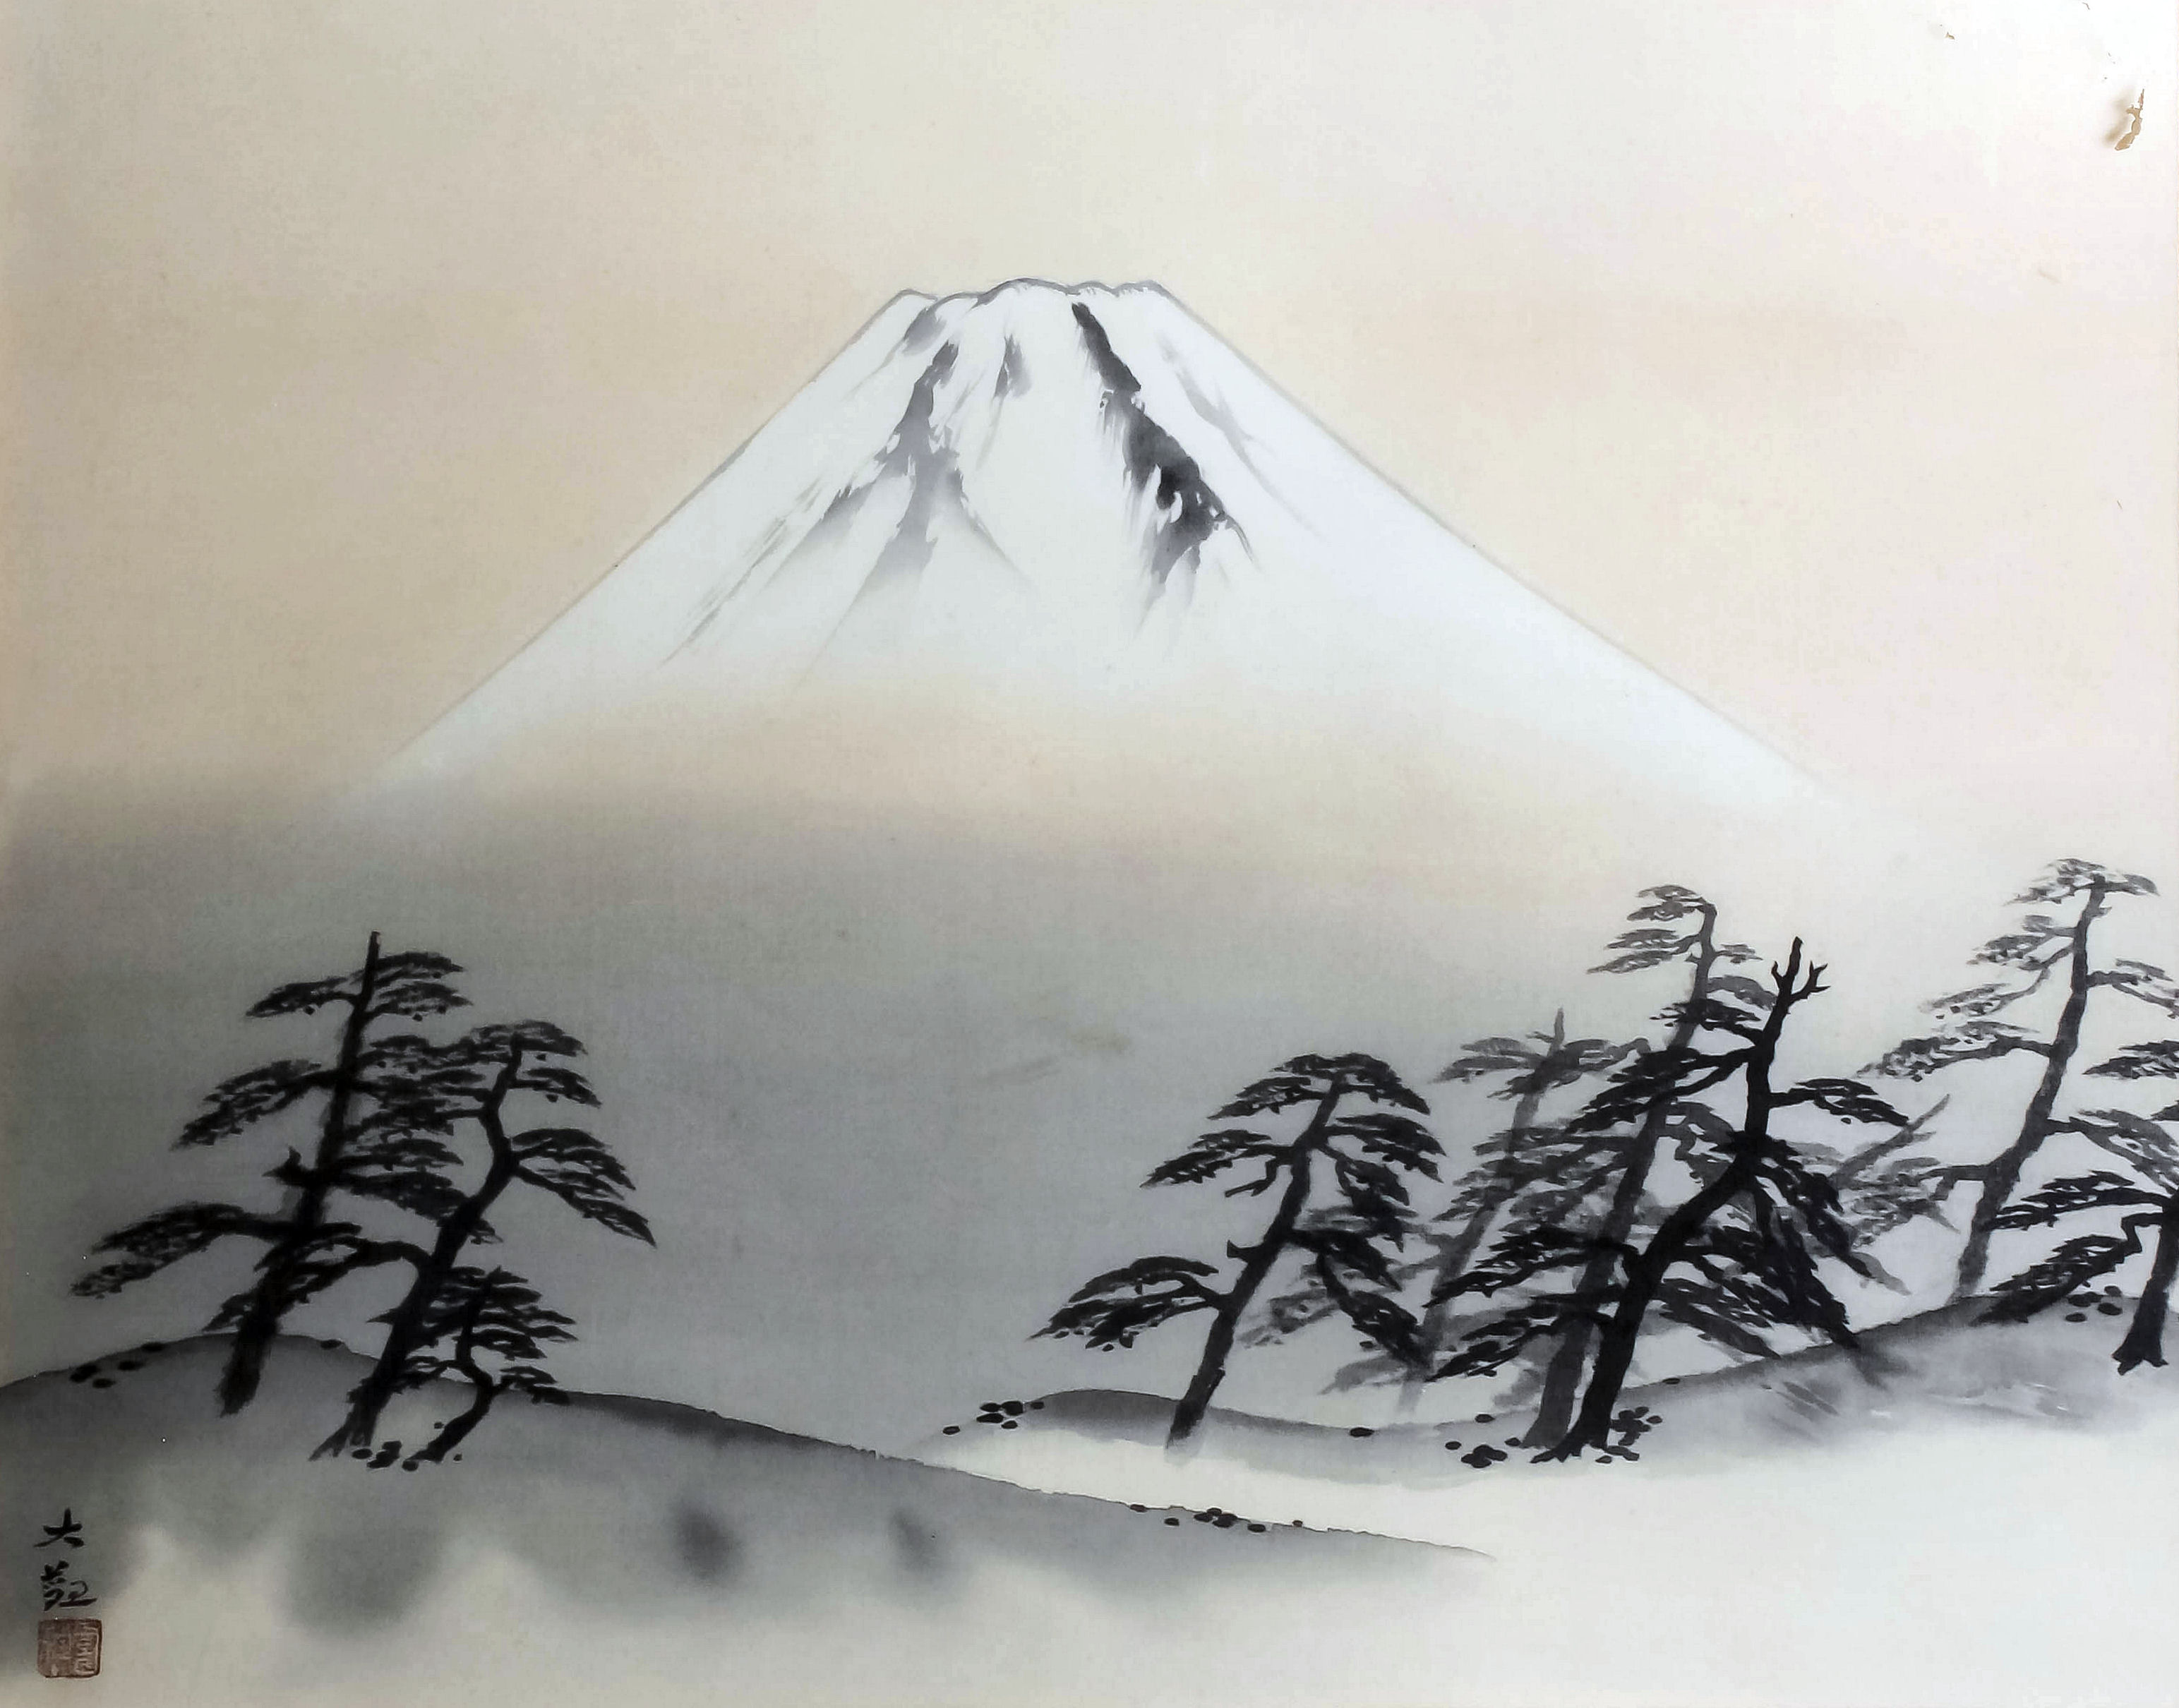 Japanese School - Print on silk - "Mount Fuji", 17ins x 21ins, bears signature, in wood frame and